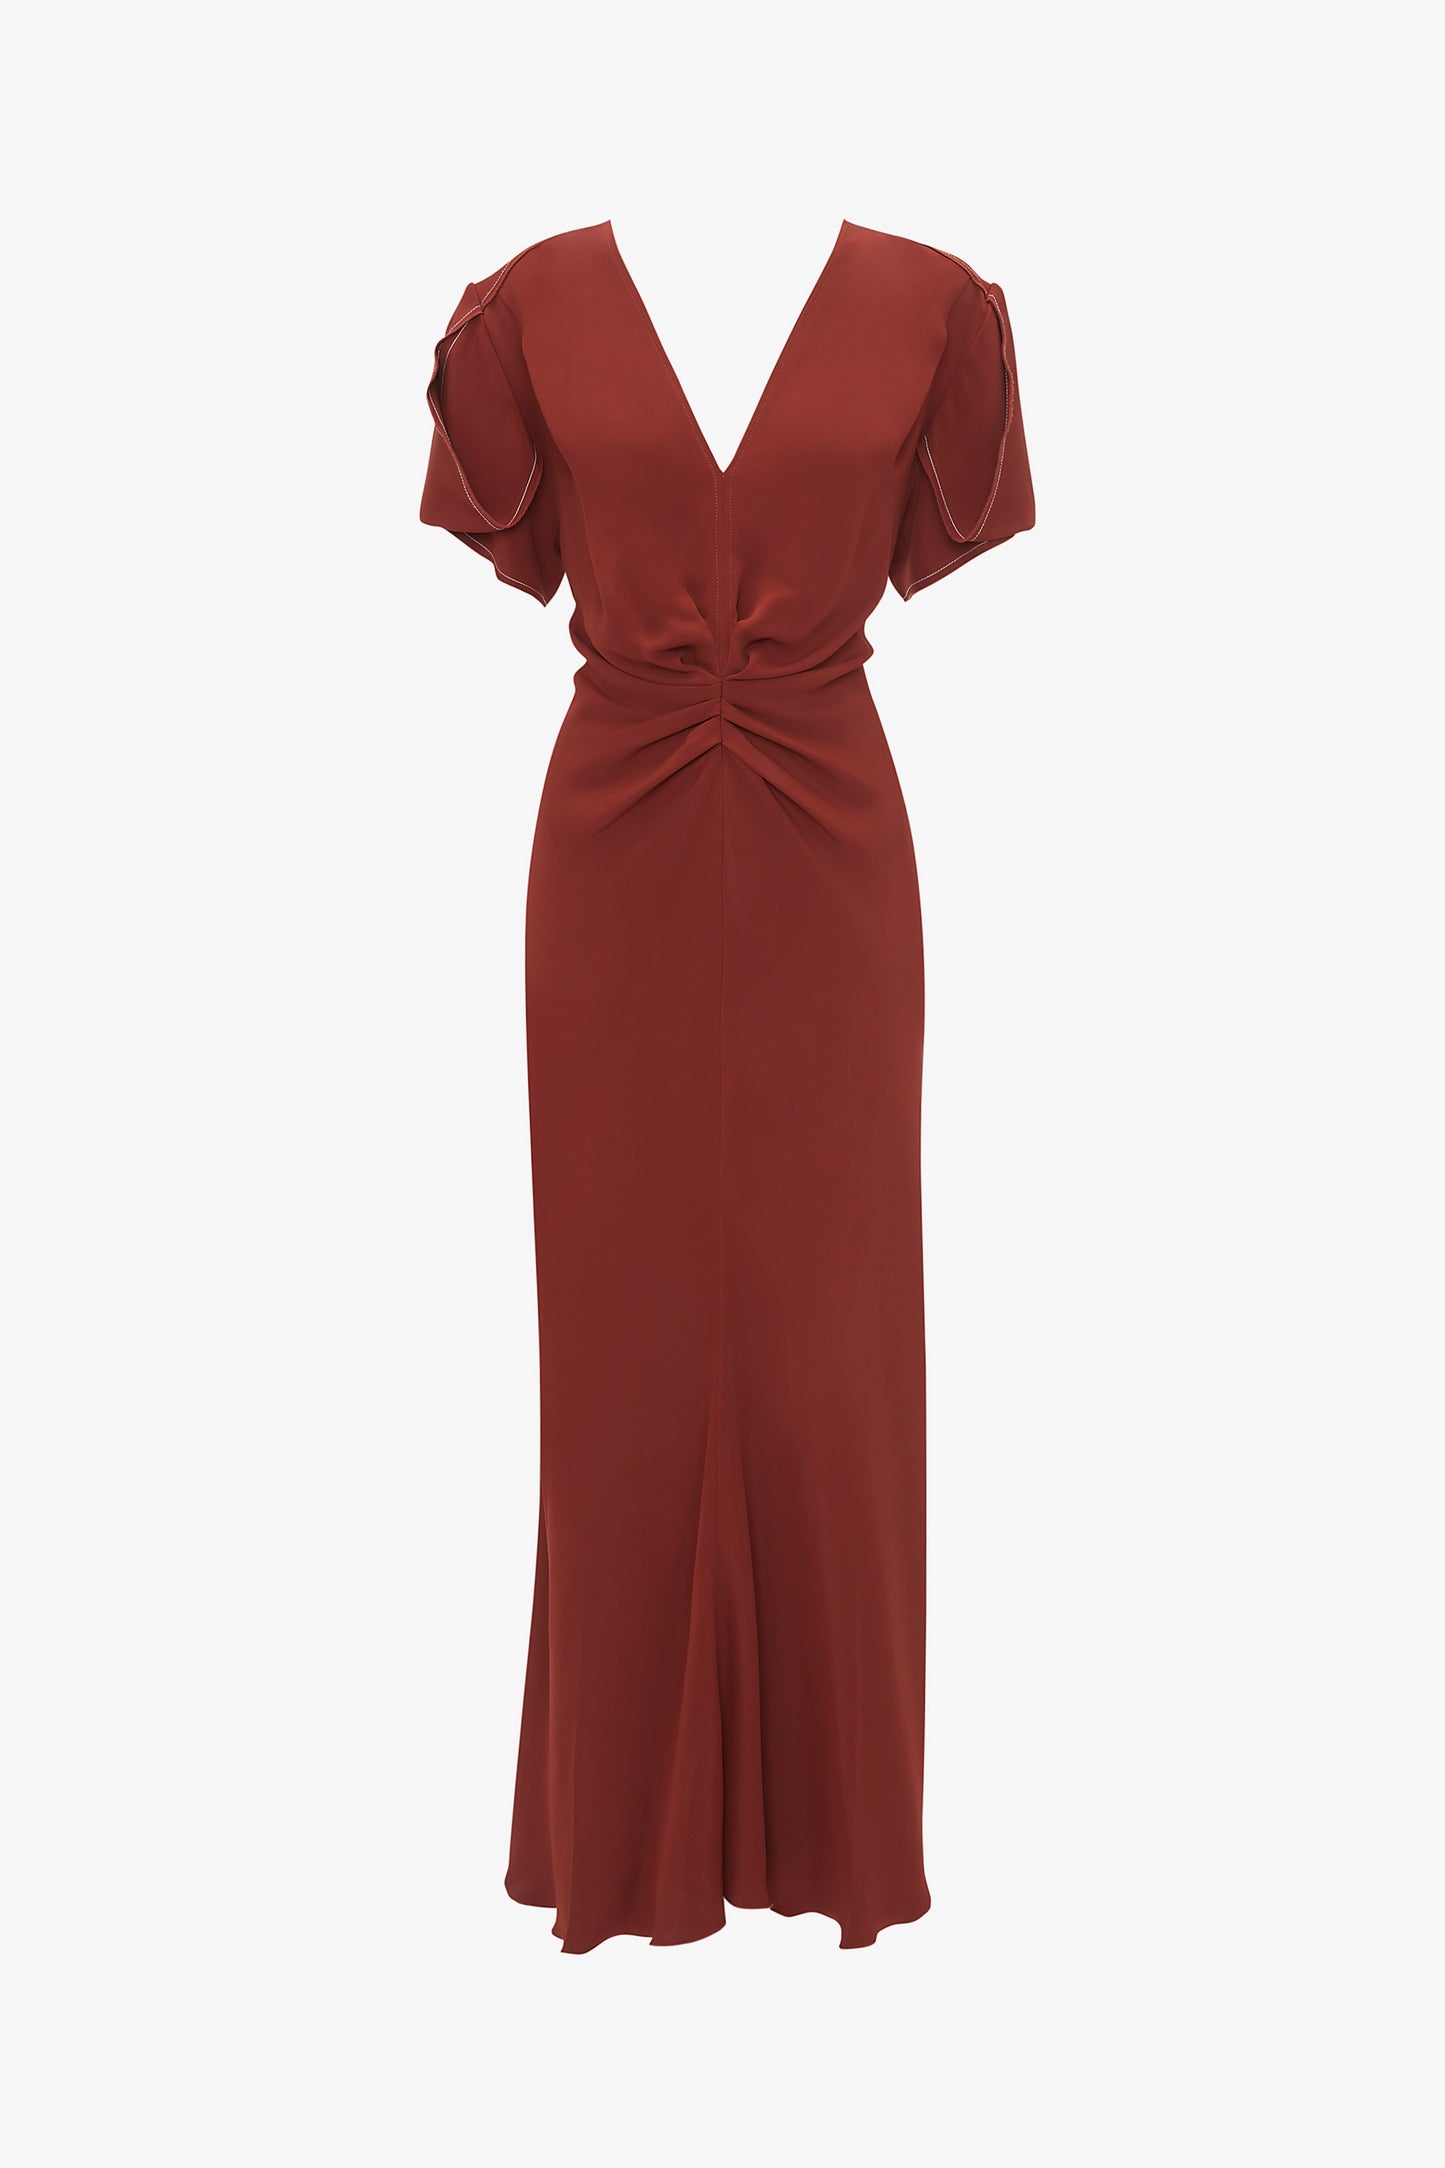 Description: The Gathered V-Neck Midi Dress In Russet by Victoria Beckham is a long, deep red dress with short, puffy sleeves, a gathered V-neck, and a waist-defining pleat detail at the waist, displayed on a plain white background.